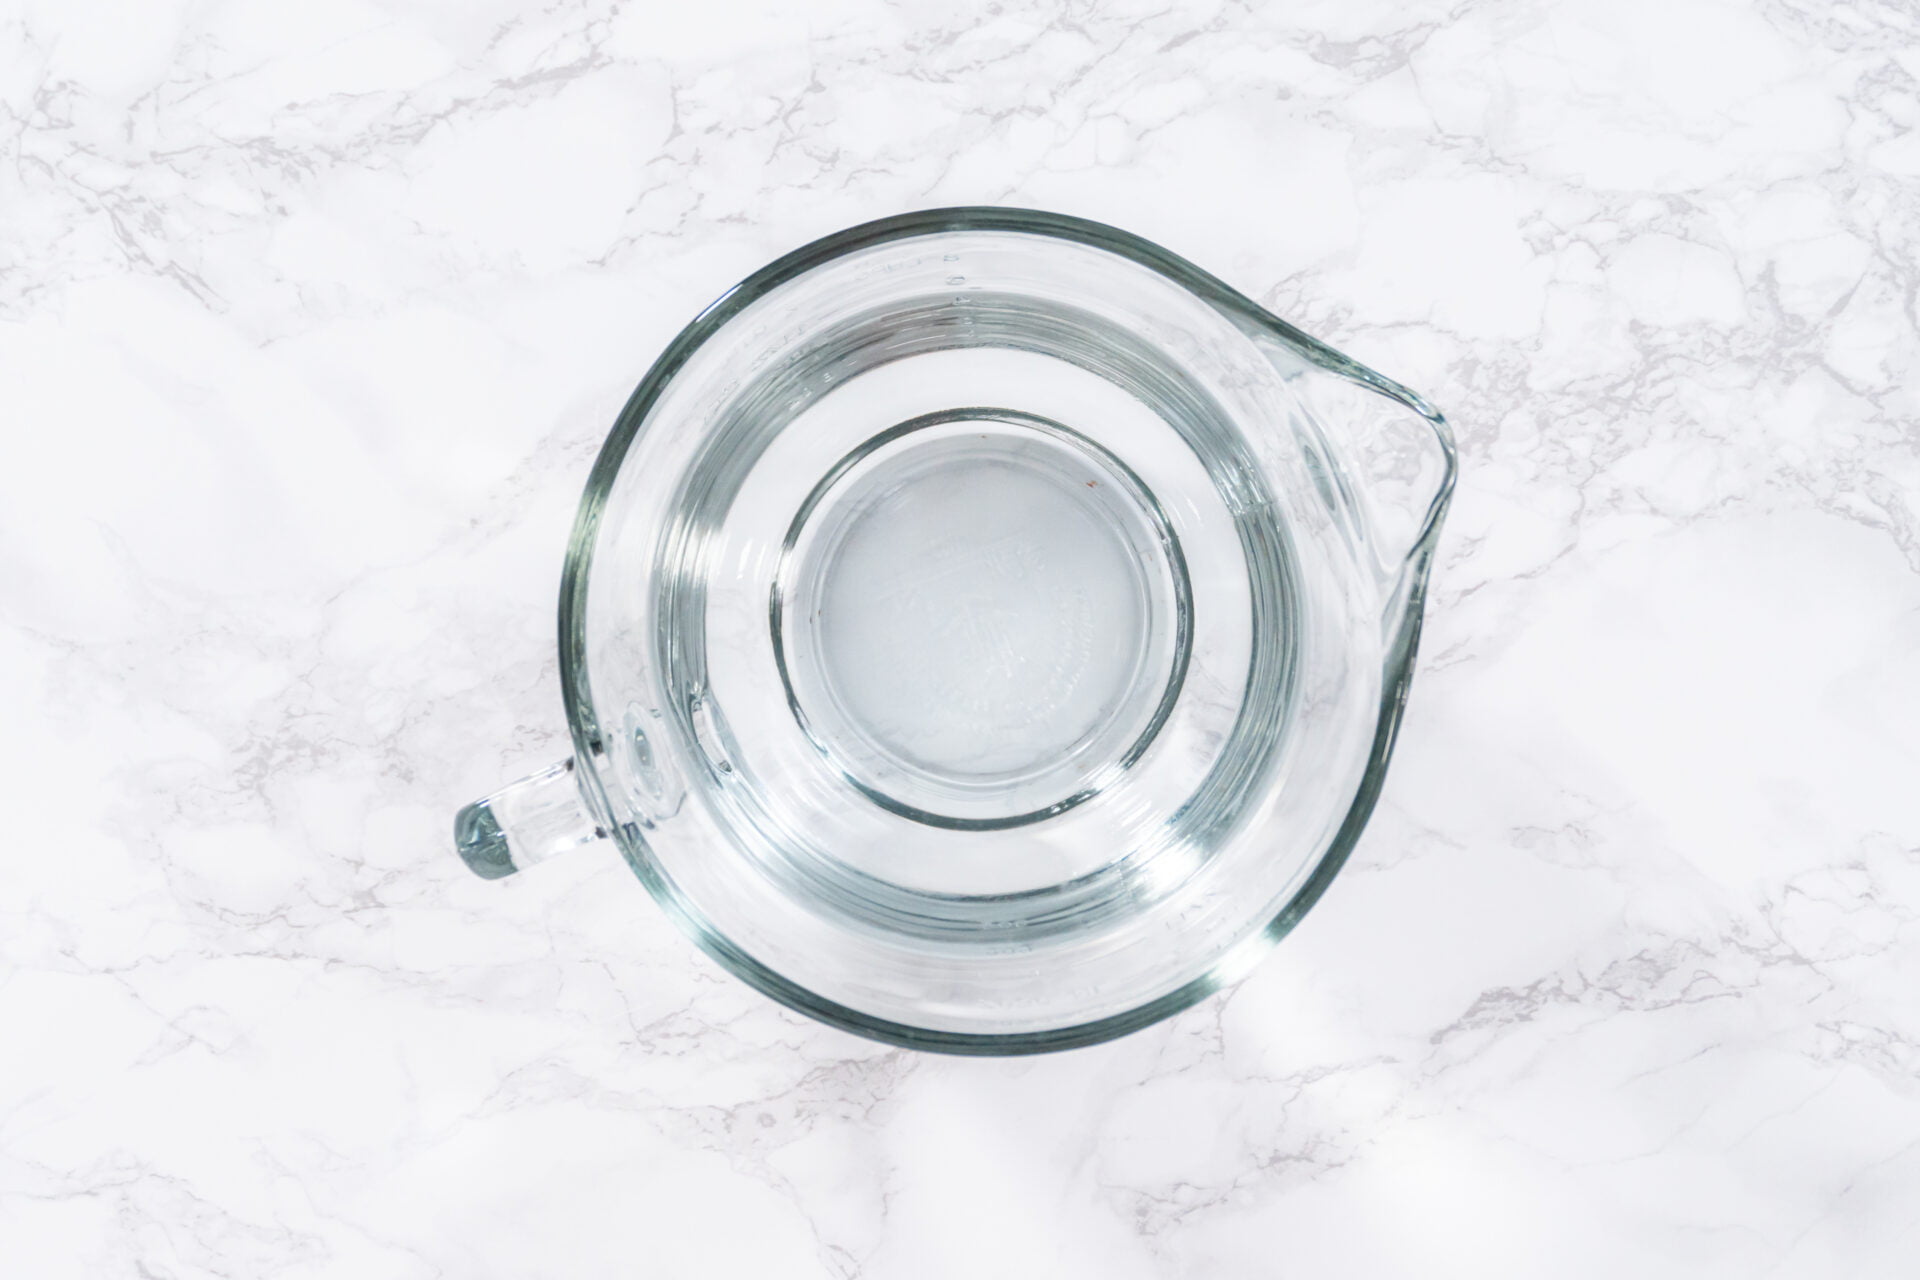 Glass measuring cups are filled with water, lined up and ready to be used in the careful washing of fresh strawberries, ensuring precise and thorough cleaning.